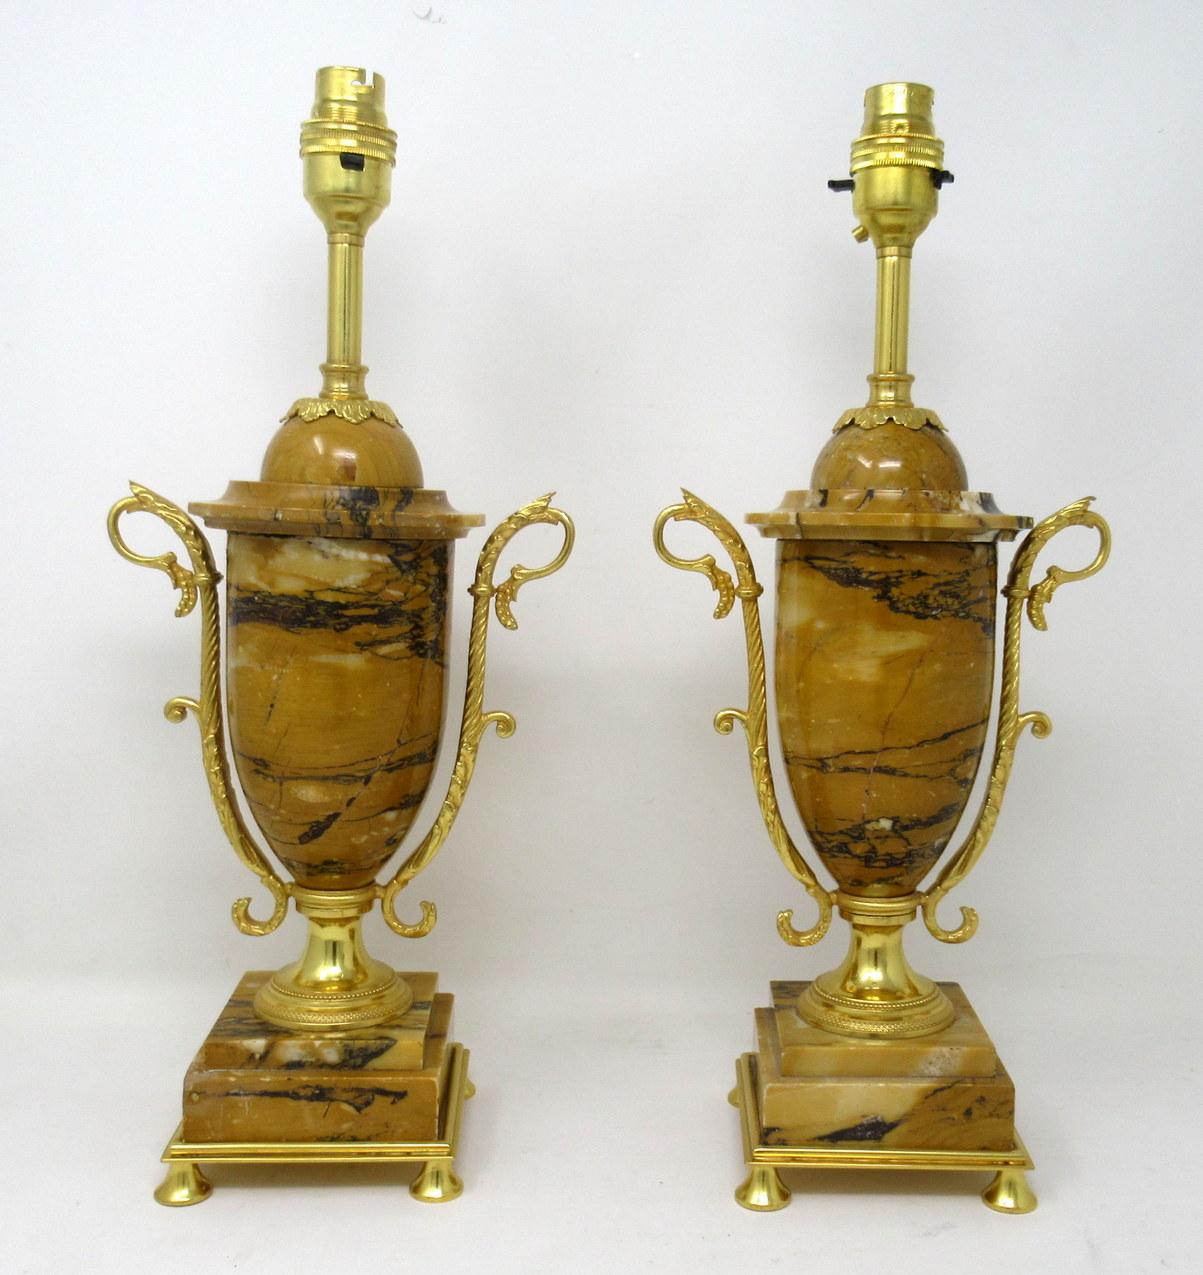 Stunning pair of French well veined sienna marble and ormolu twin handle urns of exceptional quality, now converted to electric table lamps of medium proportions,

Each of ovoid outline with applied nicely cast ormolu mounts and twin decorative